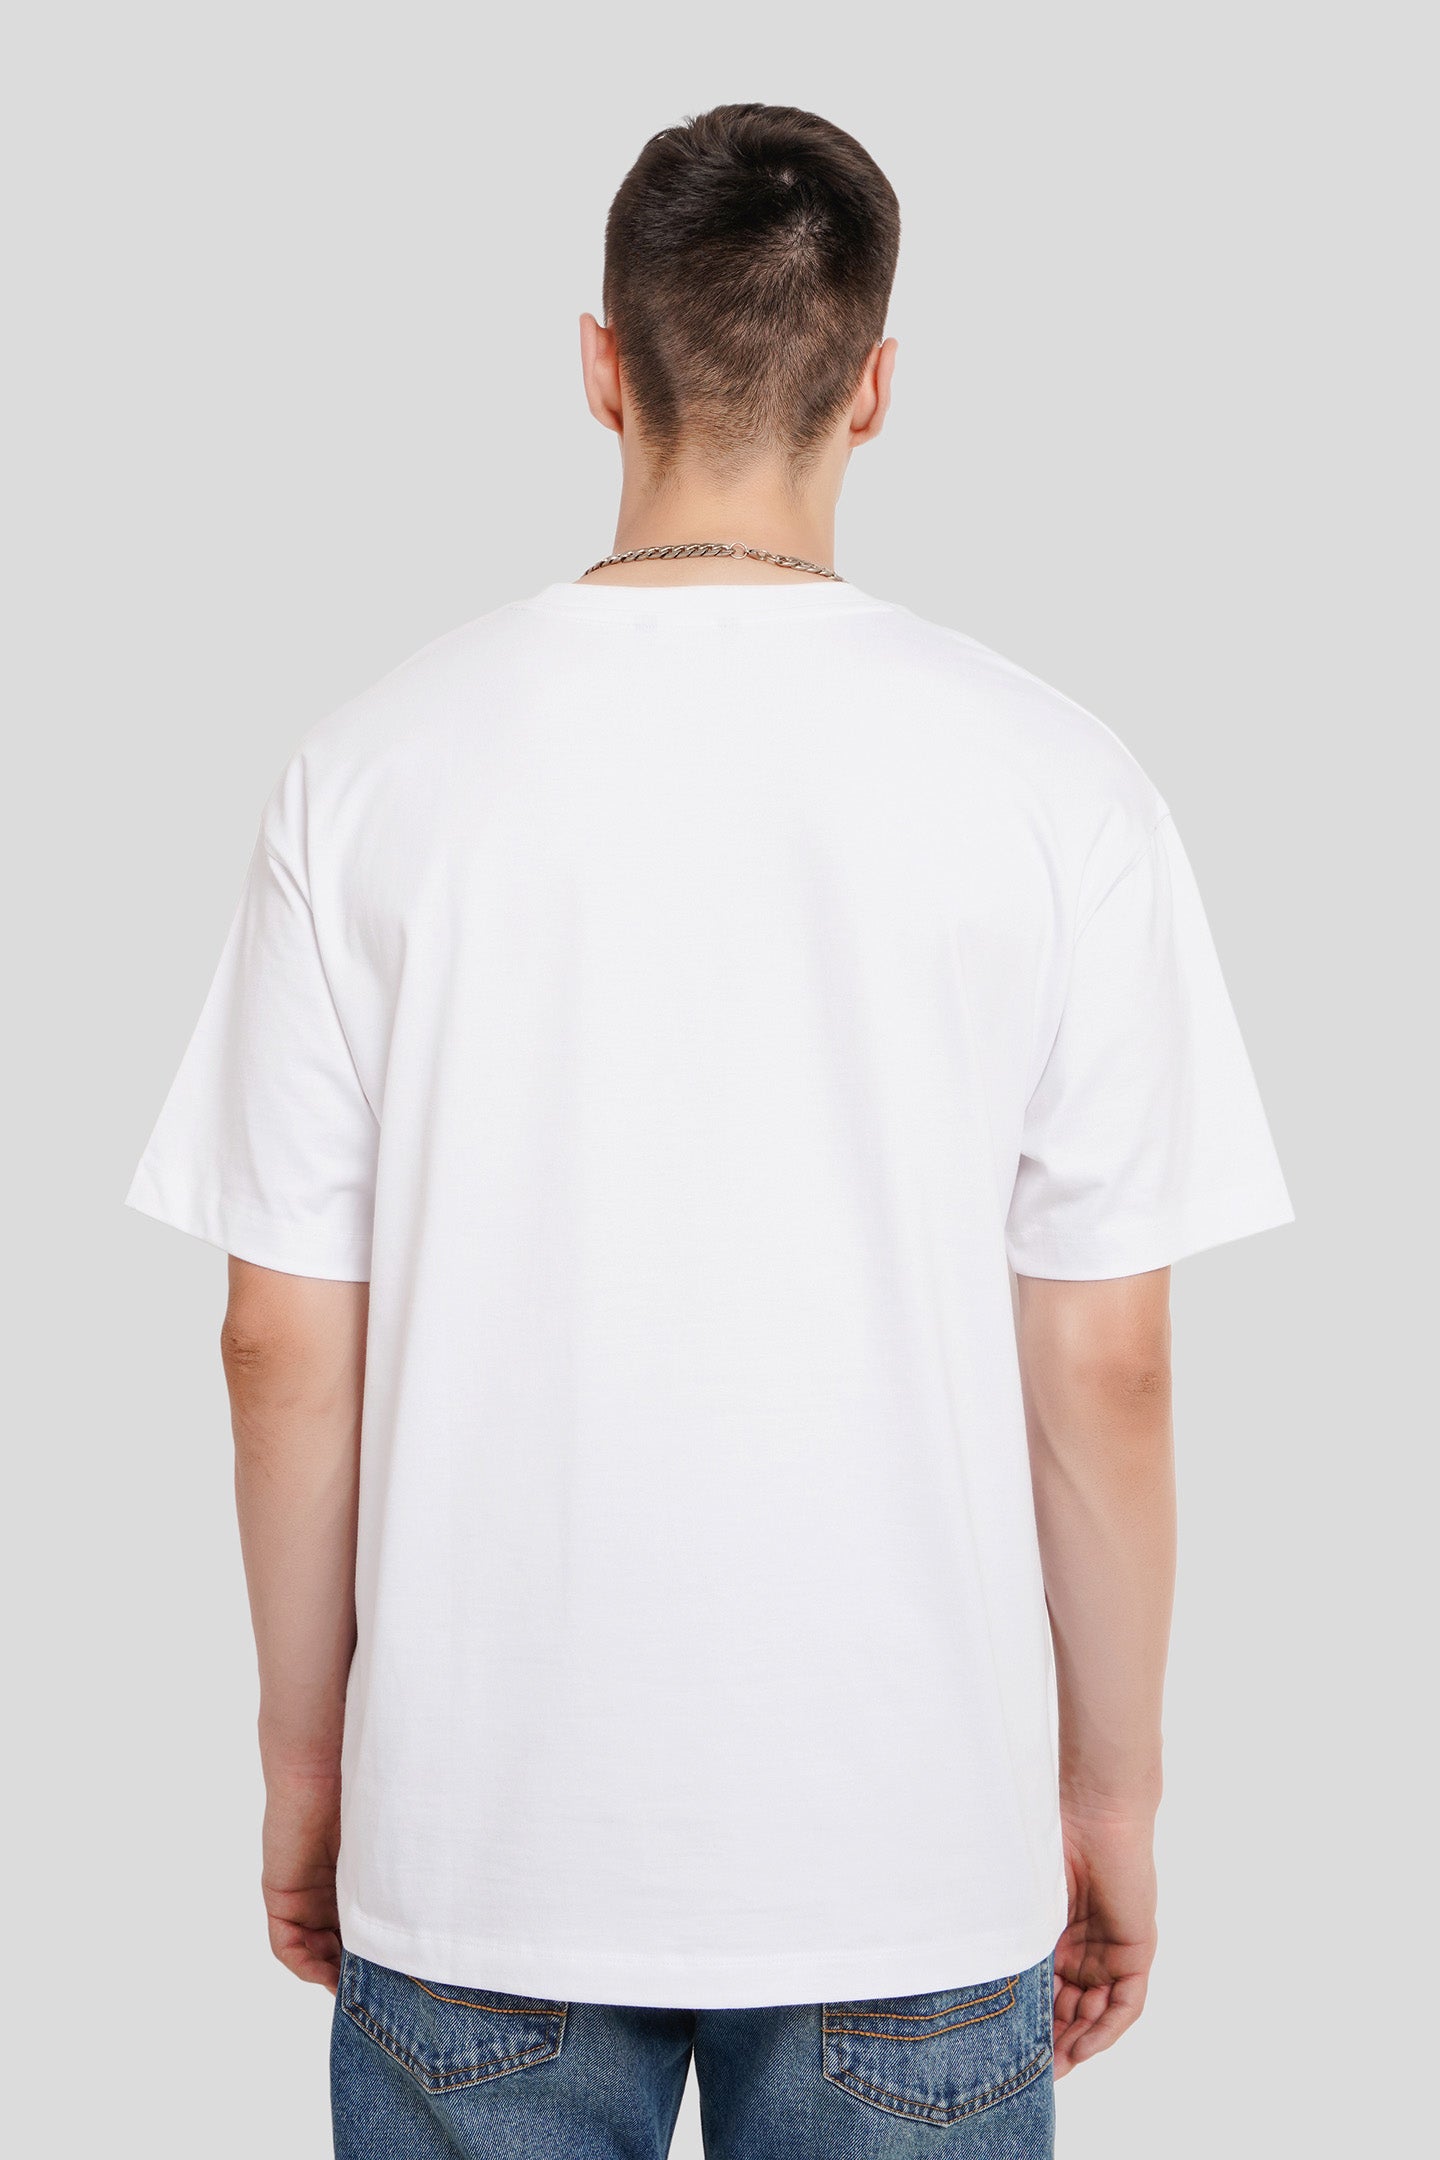 Nightmare White Printed T Shirt Men Oversized Fit With Front Design Pic 2